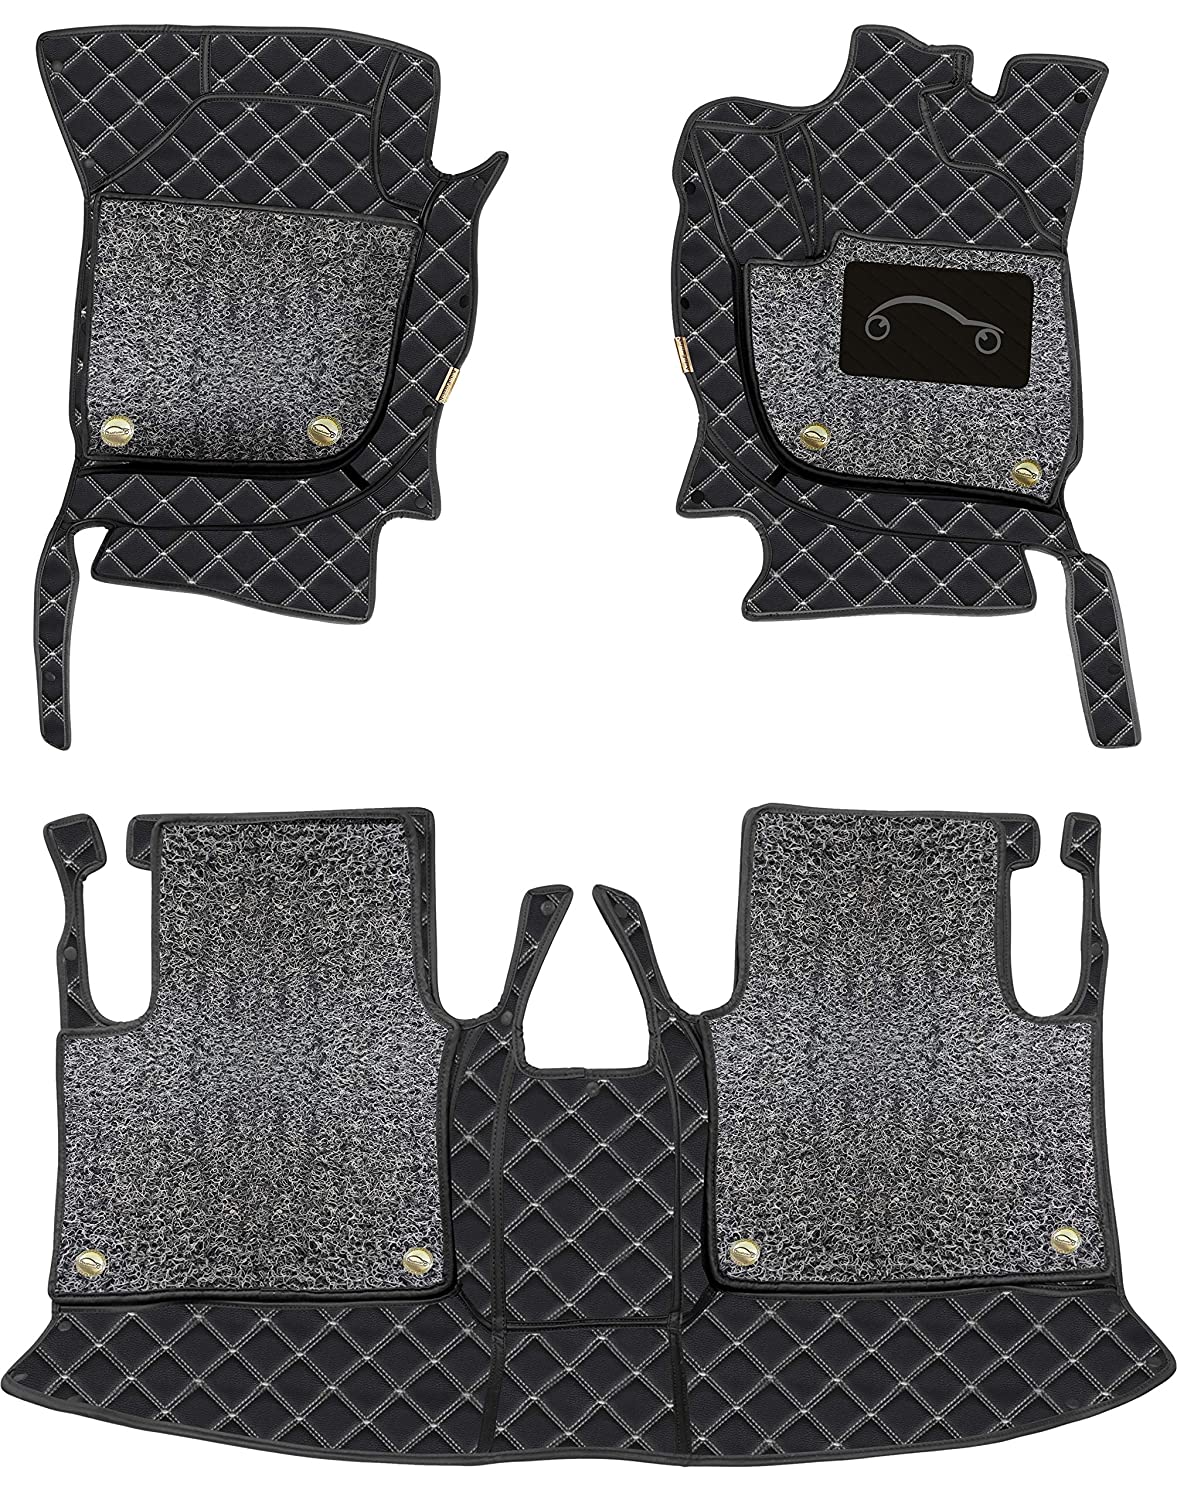 Audi Q7 2010 7D Luxury Car Mat, All Weather Proof, Anti-Skid, 100% Waterproof & Odorless with Unique Diamond Fish Design (24mm Luxury PU Leather, 2 Rows)